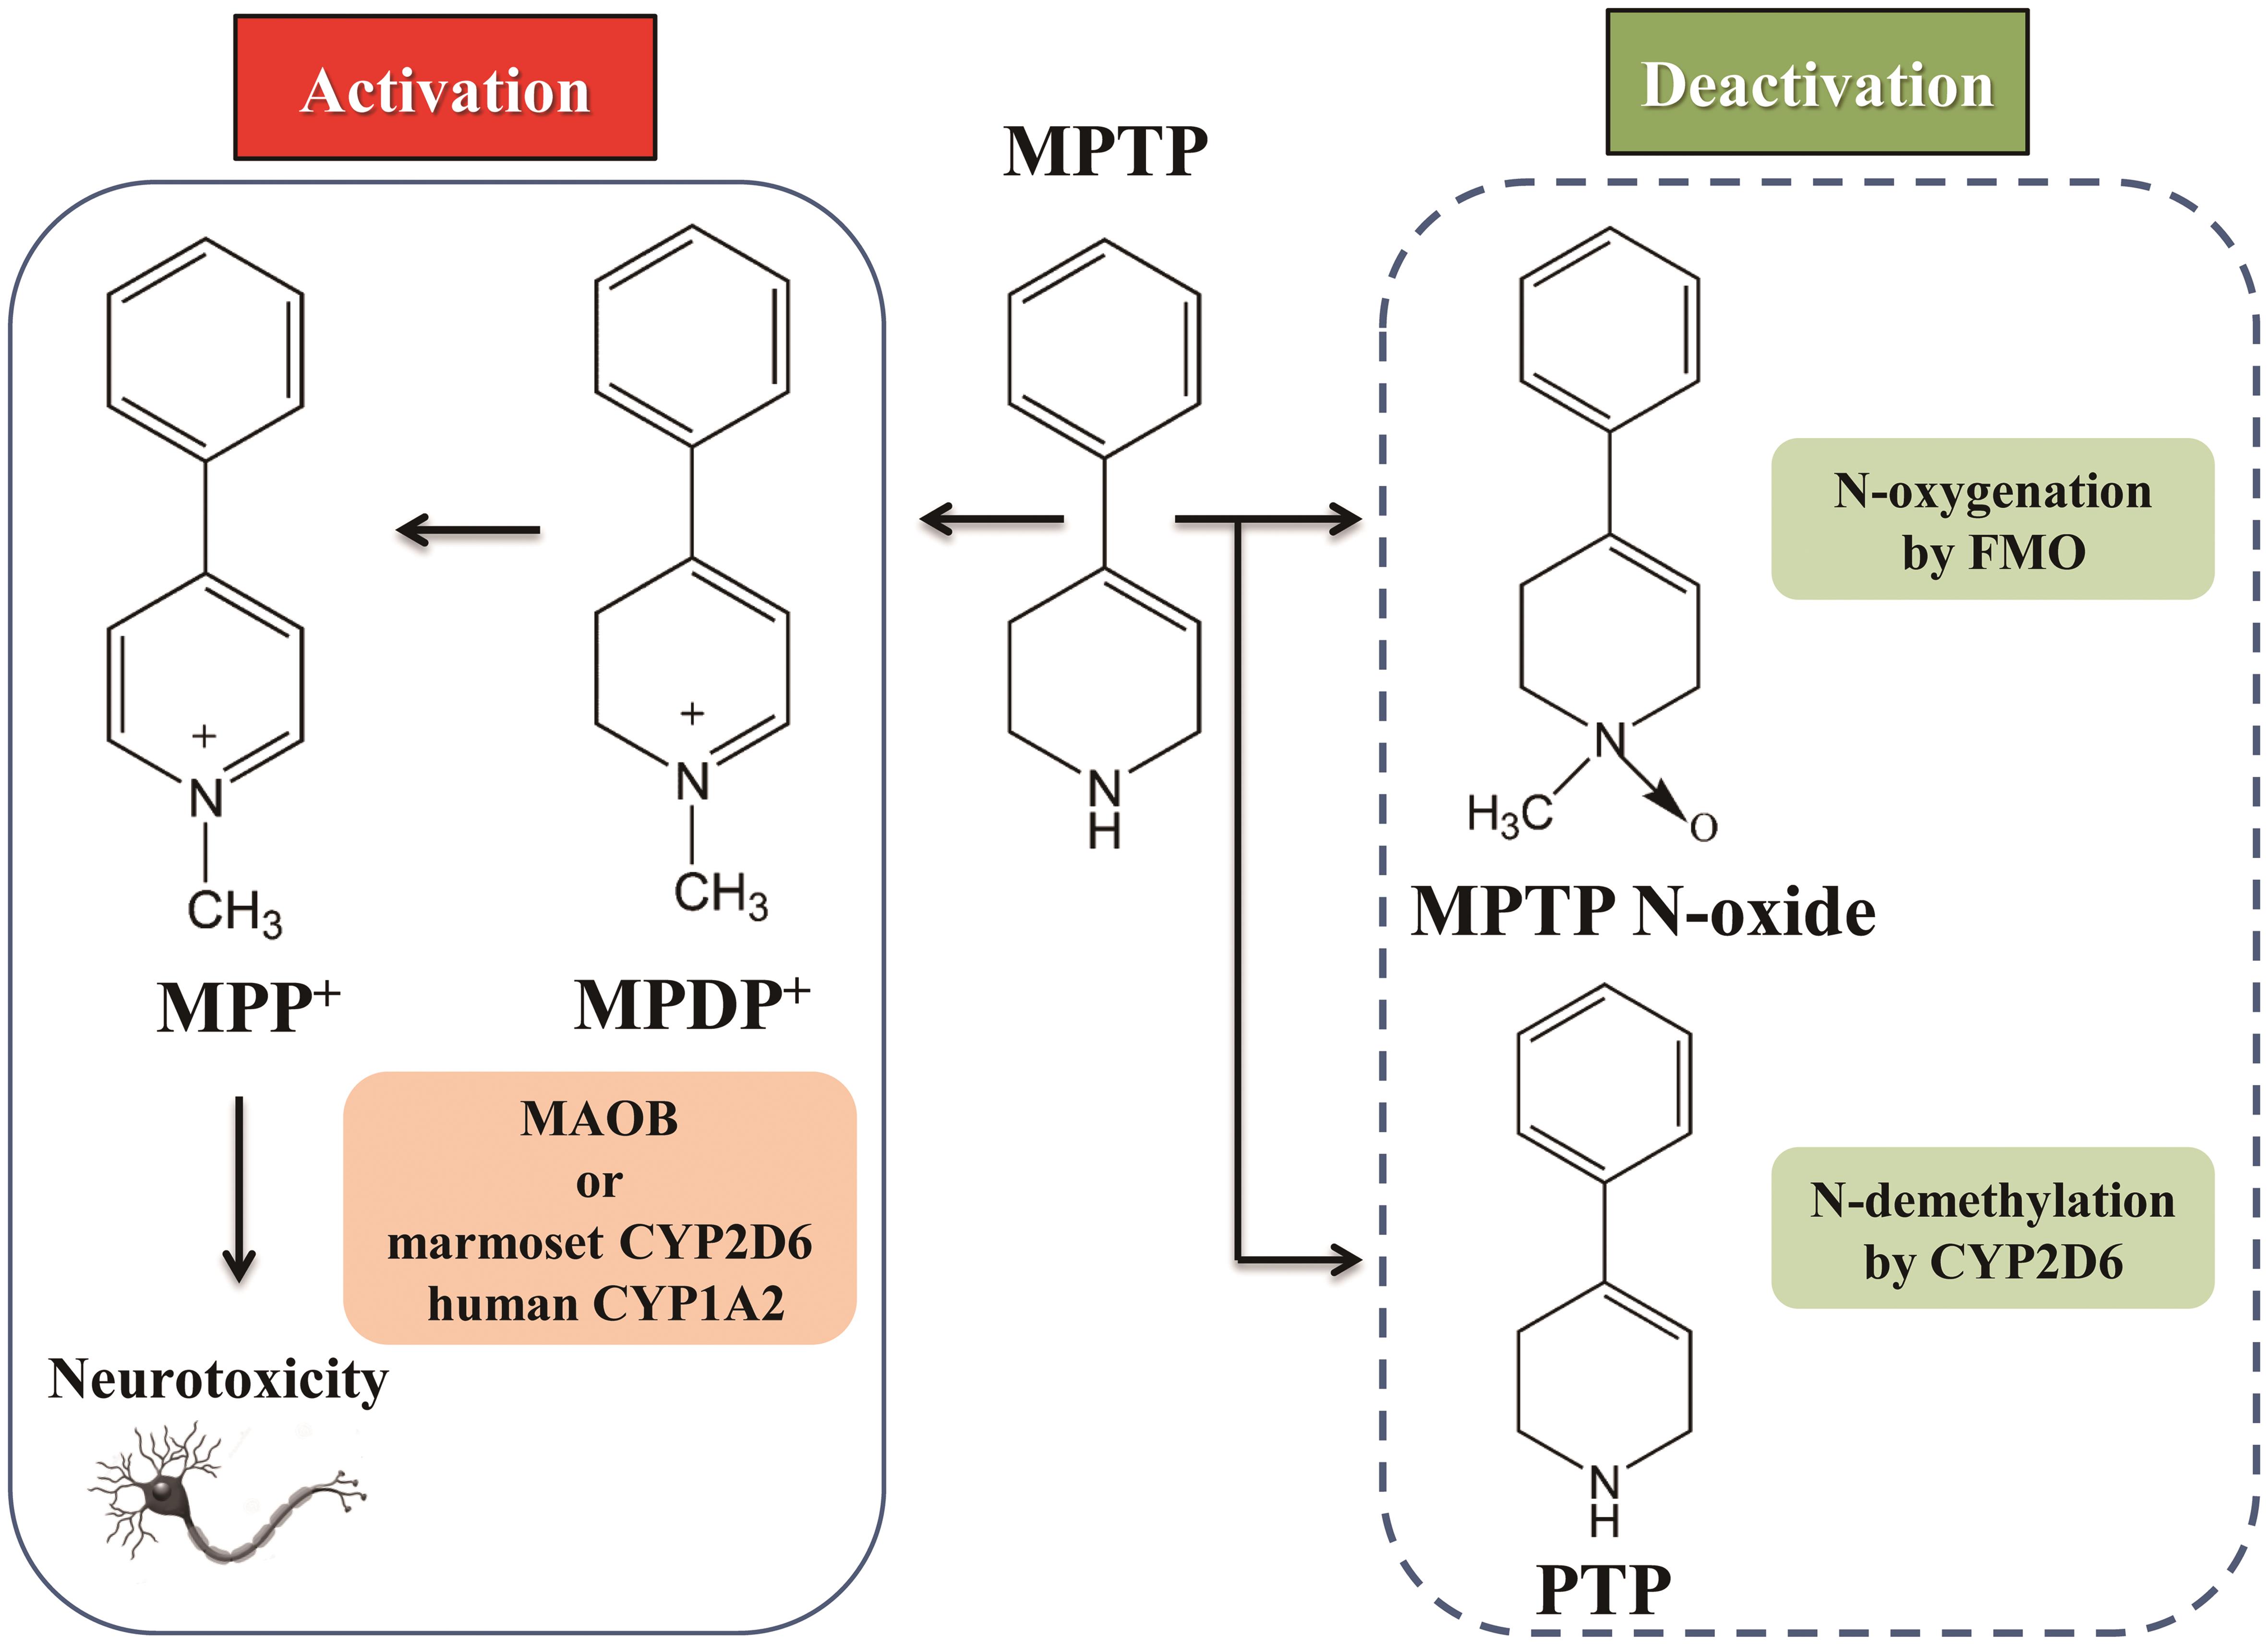 Metabolic activation and deactivation of MPTP.